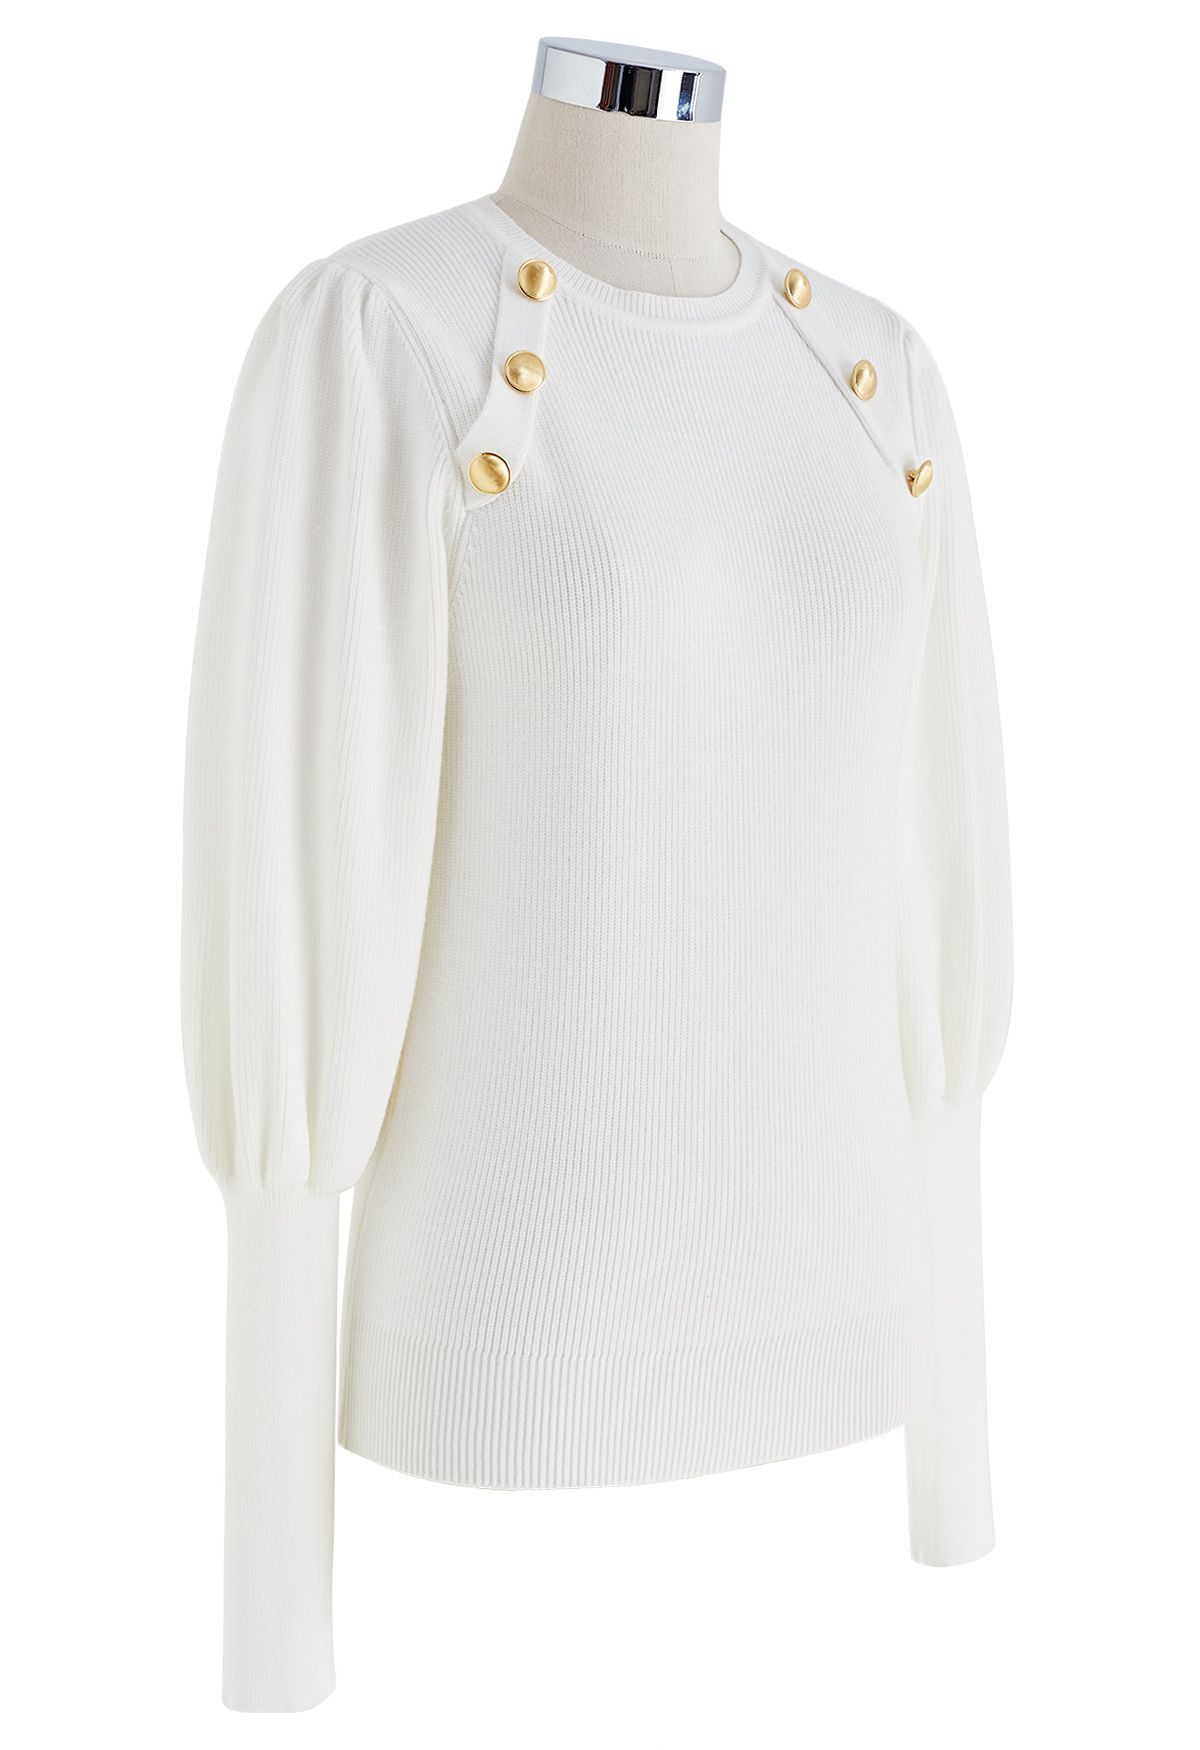 Bubble Sleeves Button Trimmed Knit Top in White